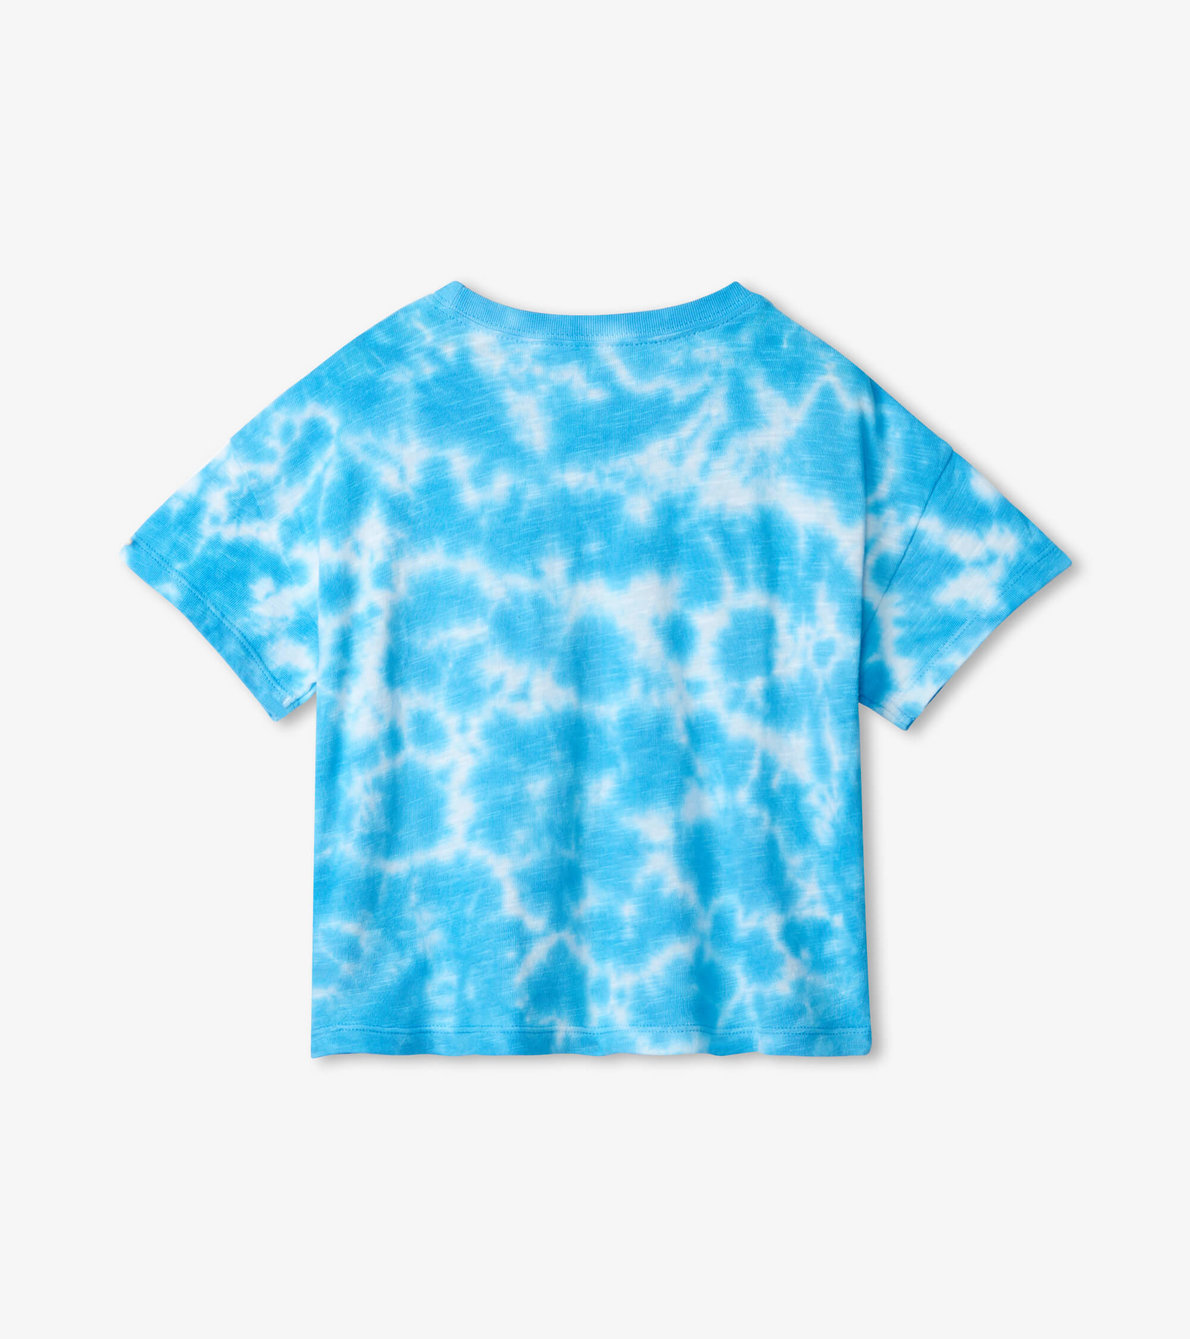 View larger image of Blue Sky Tie Dye Front Pocket Tee